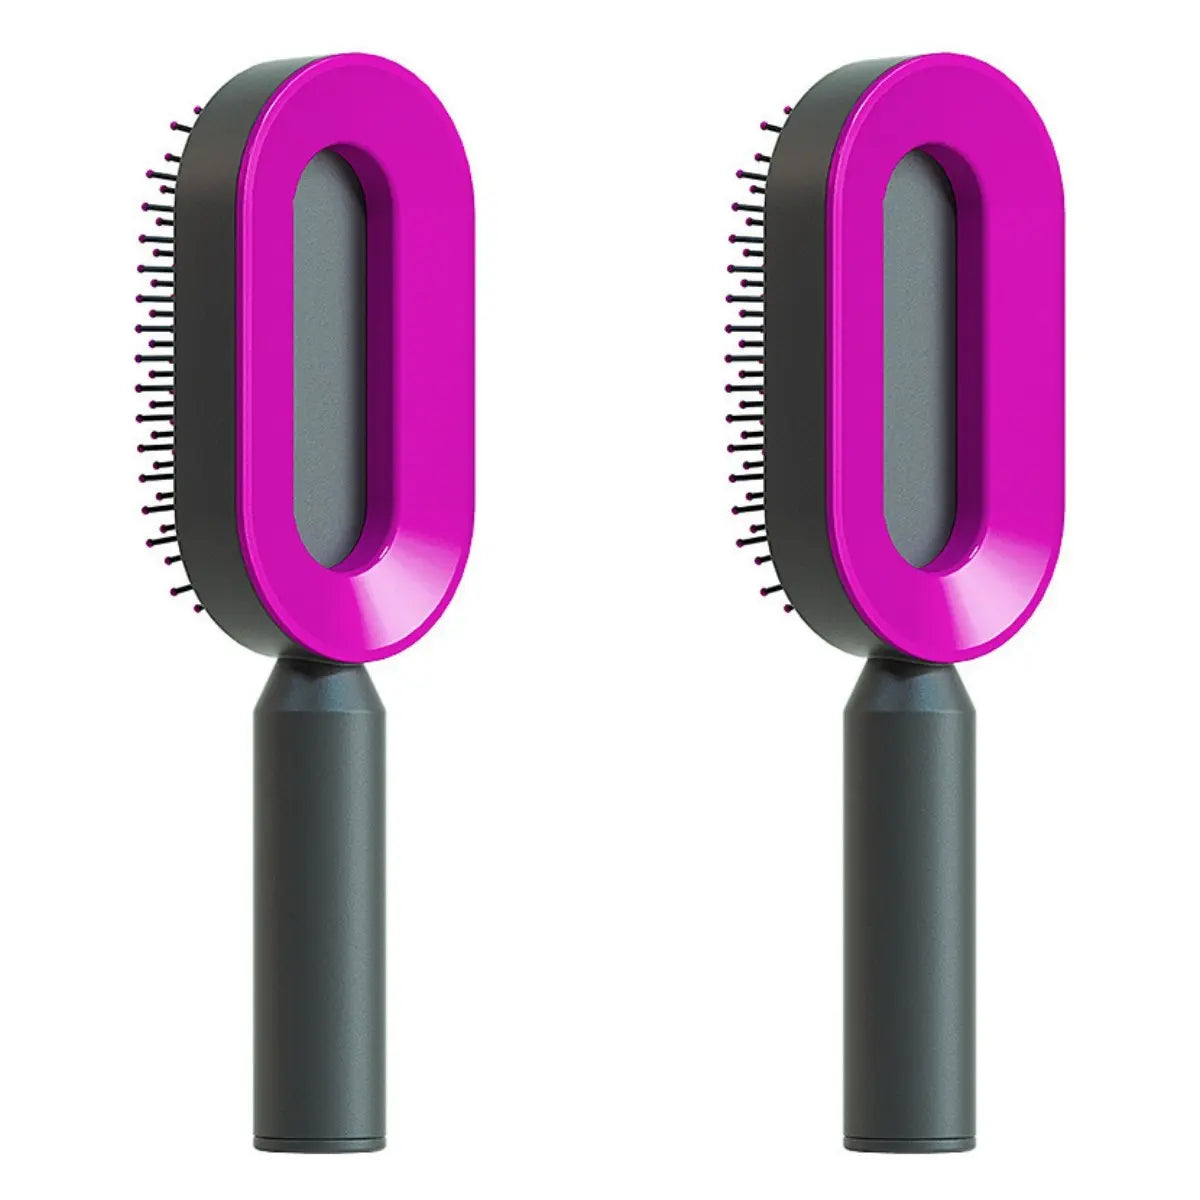 Self Cleaning Hair Brush For Women One-key Cleaning Hair Loss Airbag Massage Scalp Comb Anti-Static Hairbrush - Trending's Arena Beauty Self Cleaning Hair Brush For Women One-key Cleaning Hair Loss Airbag Massage Scalp Comb Anti-Static Hairbrush FACE Set-M